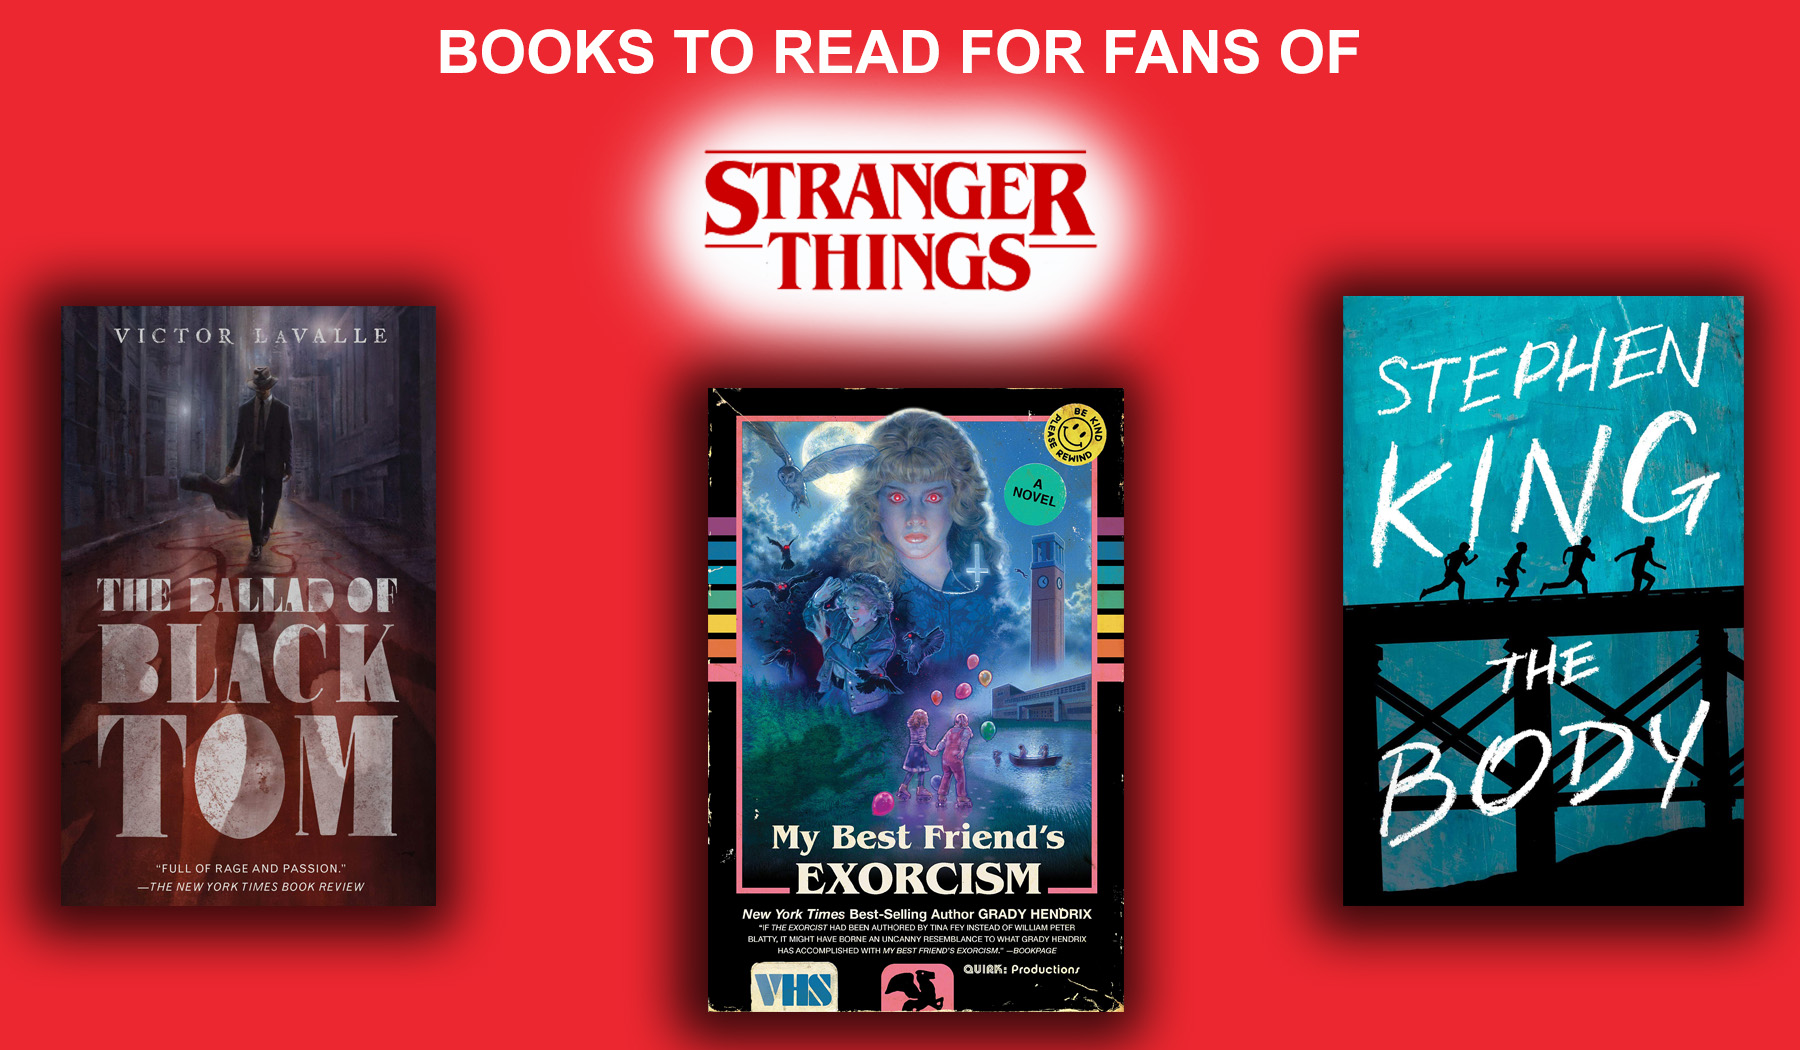 The 'Stranger Things' Prequel Book Series Is a Must-Read for Fans